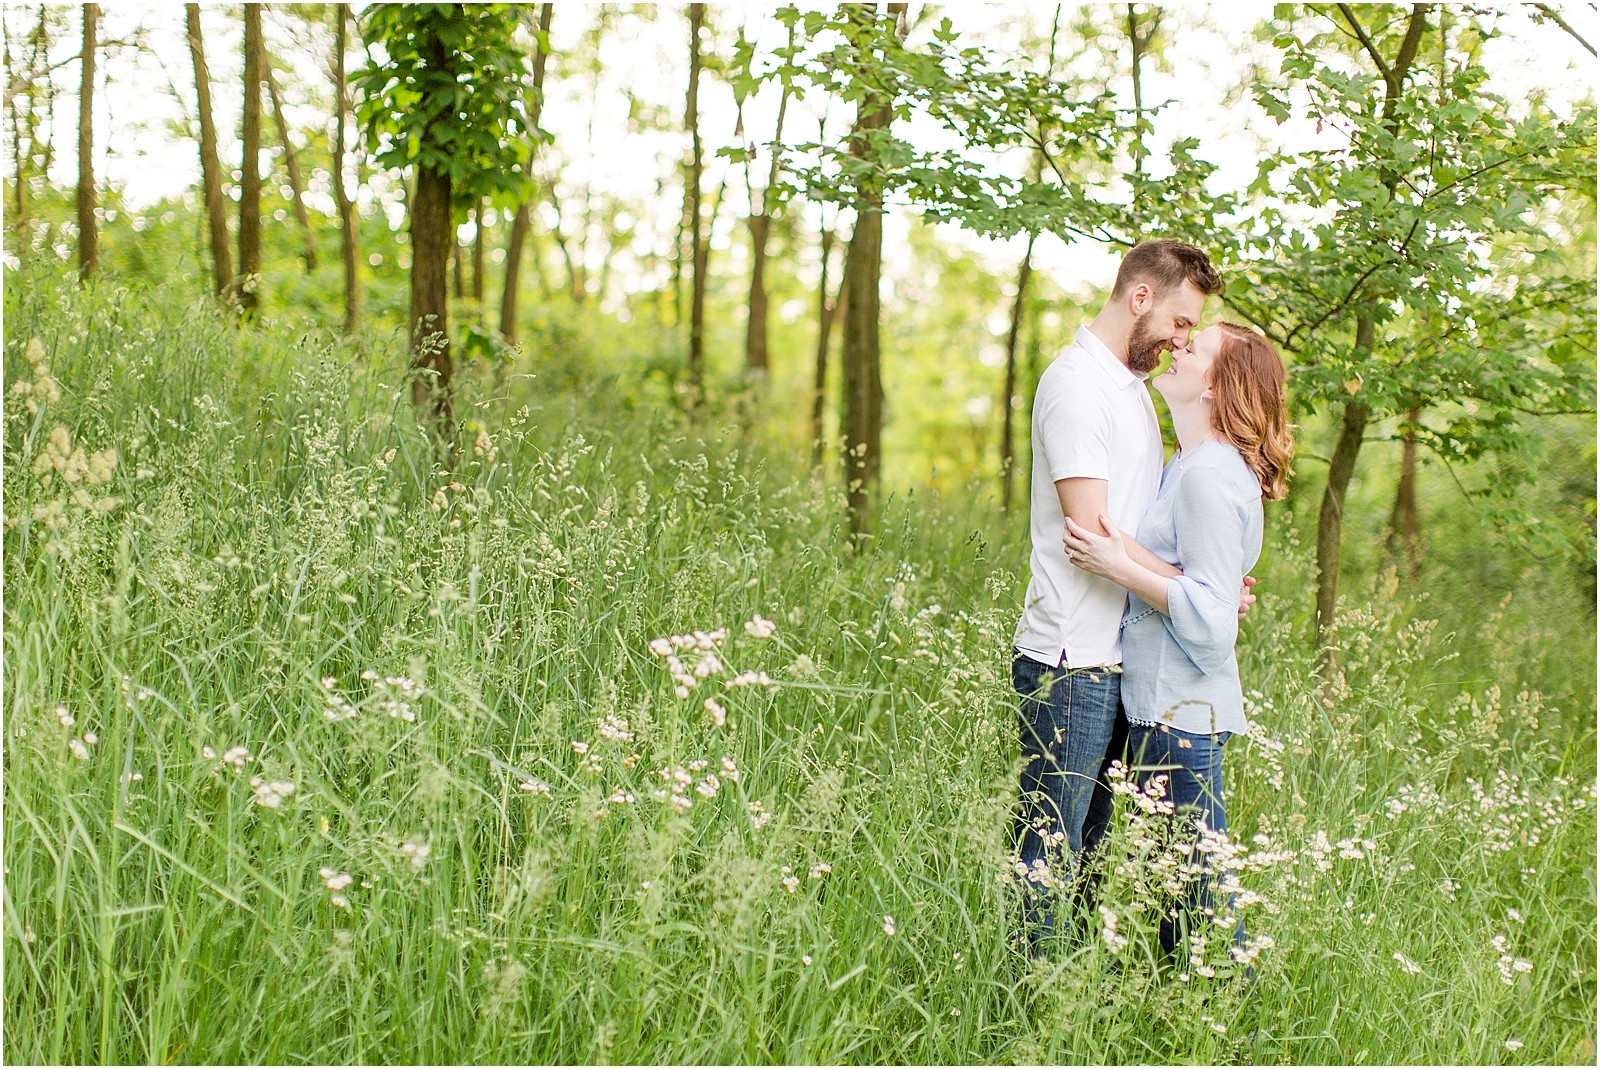 Amy and Logan | The Corner House Bed and Breakfast | Engagement Session015.jpg